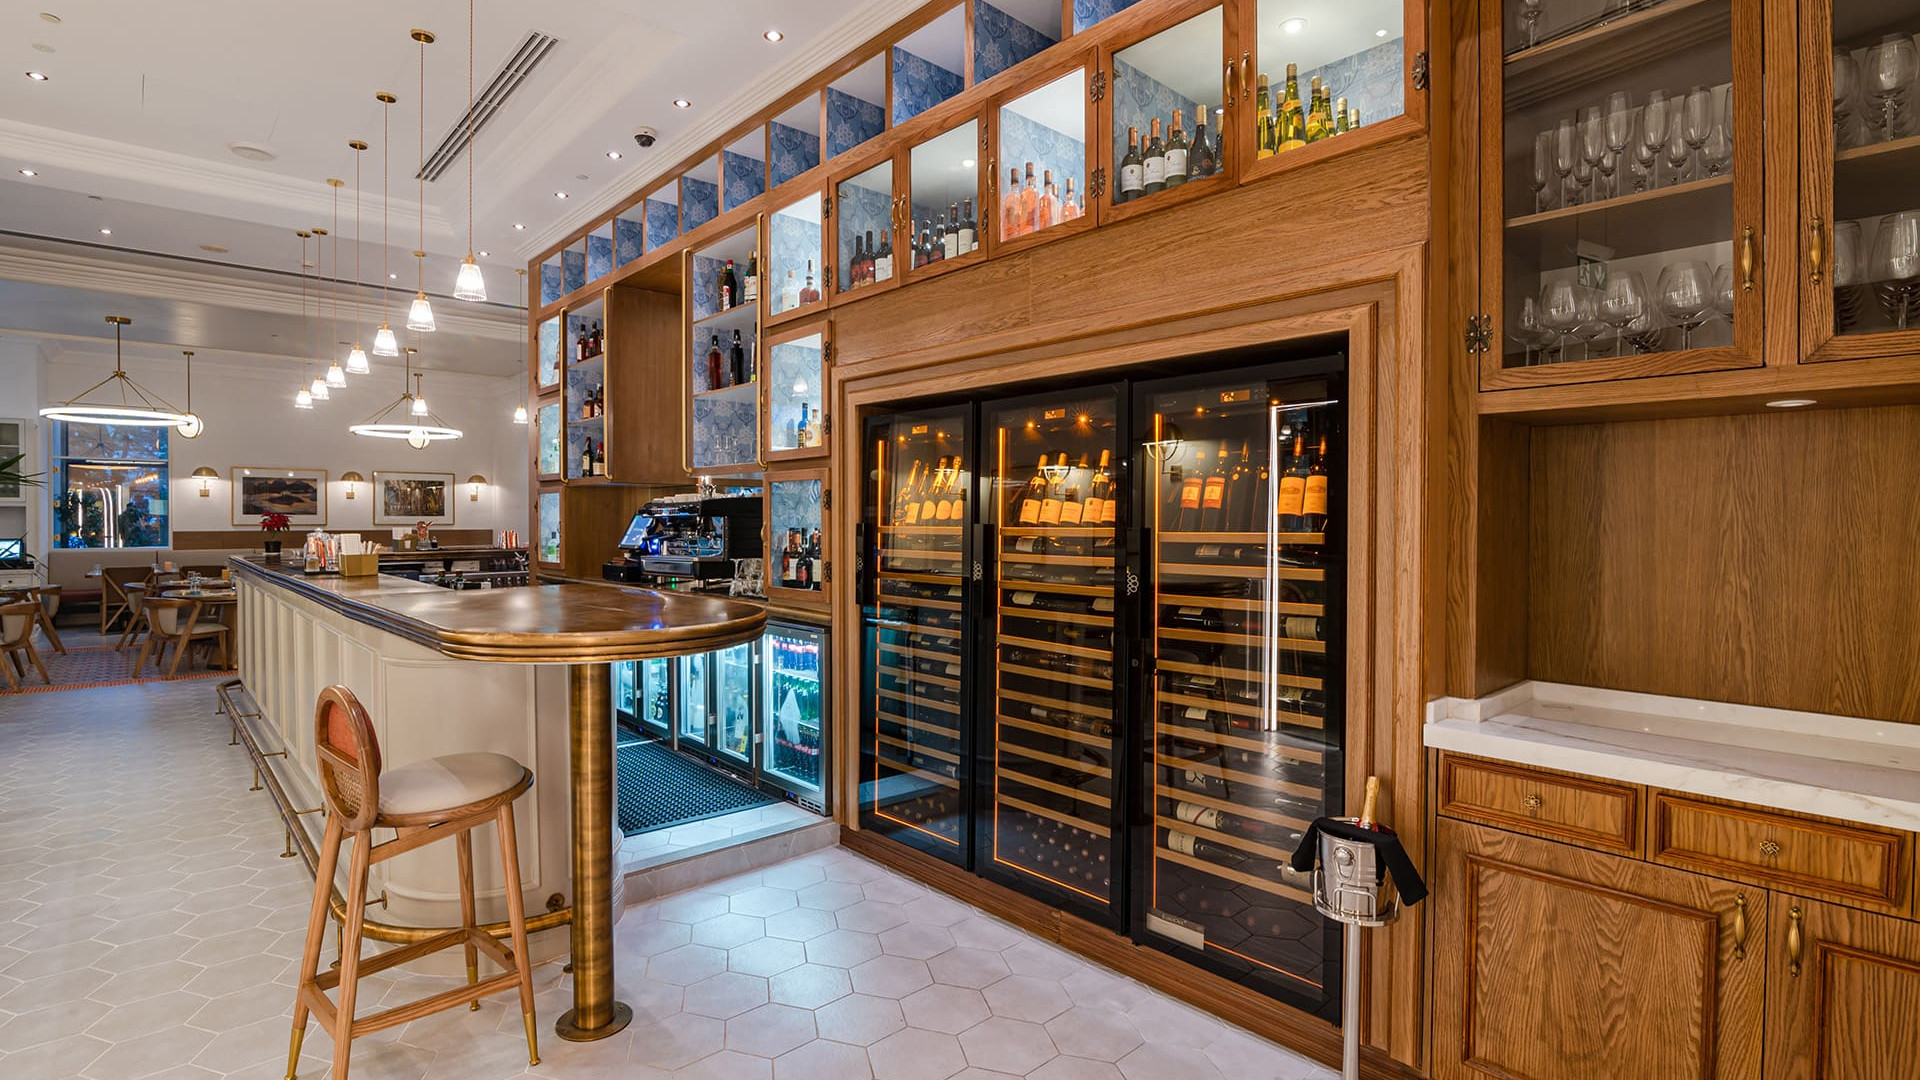 Luxury restaurant design. Scenography to enhance the wine offering, attract attention to the wine list with quality and reliable wine coolers and cellar layout solutions. Inspiration…